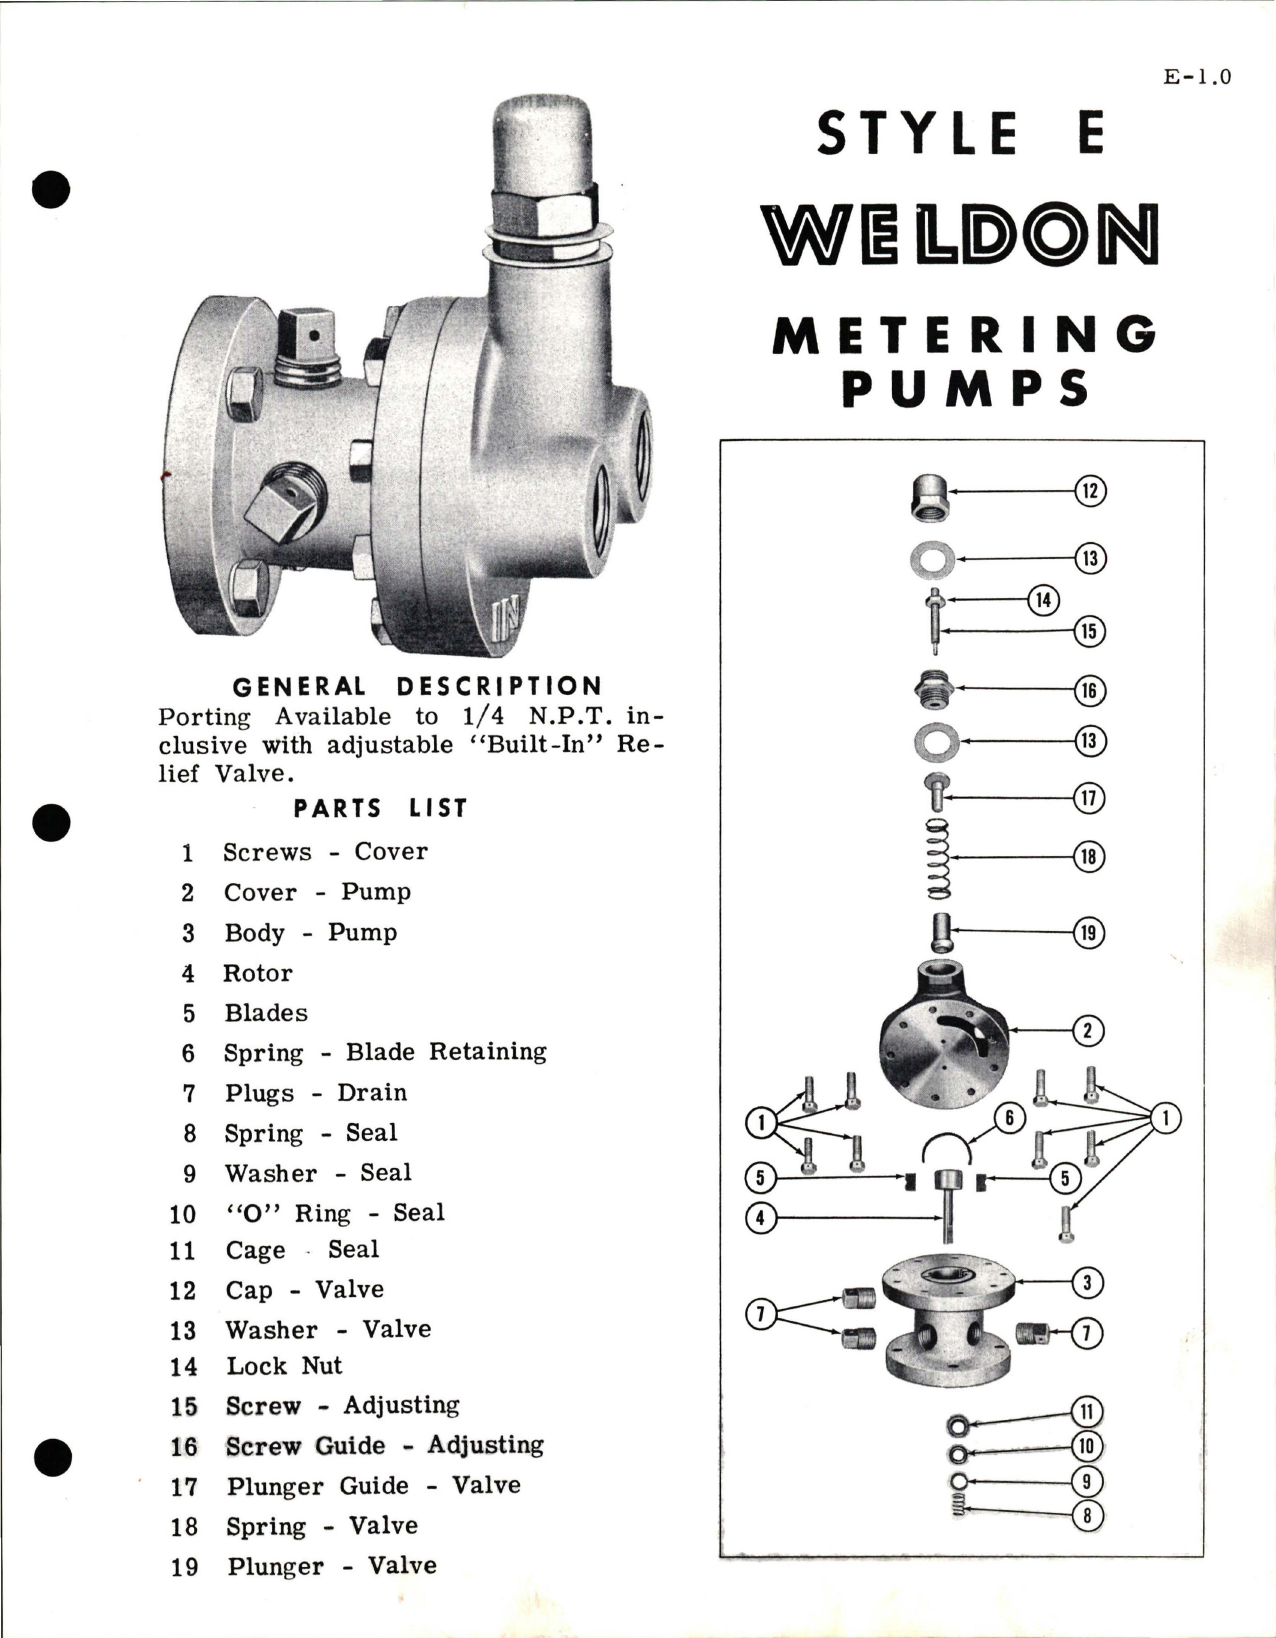 Sample page 5 from AirCorps Library document: Service Information with Test Procedures and Parts List for Fluid Metering Pumps